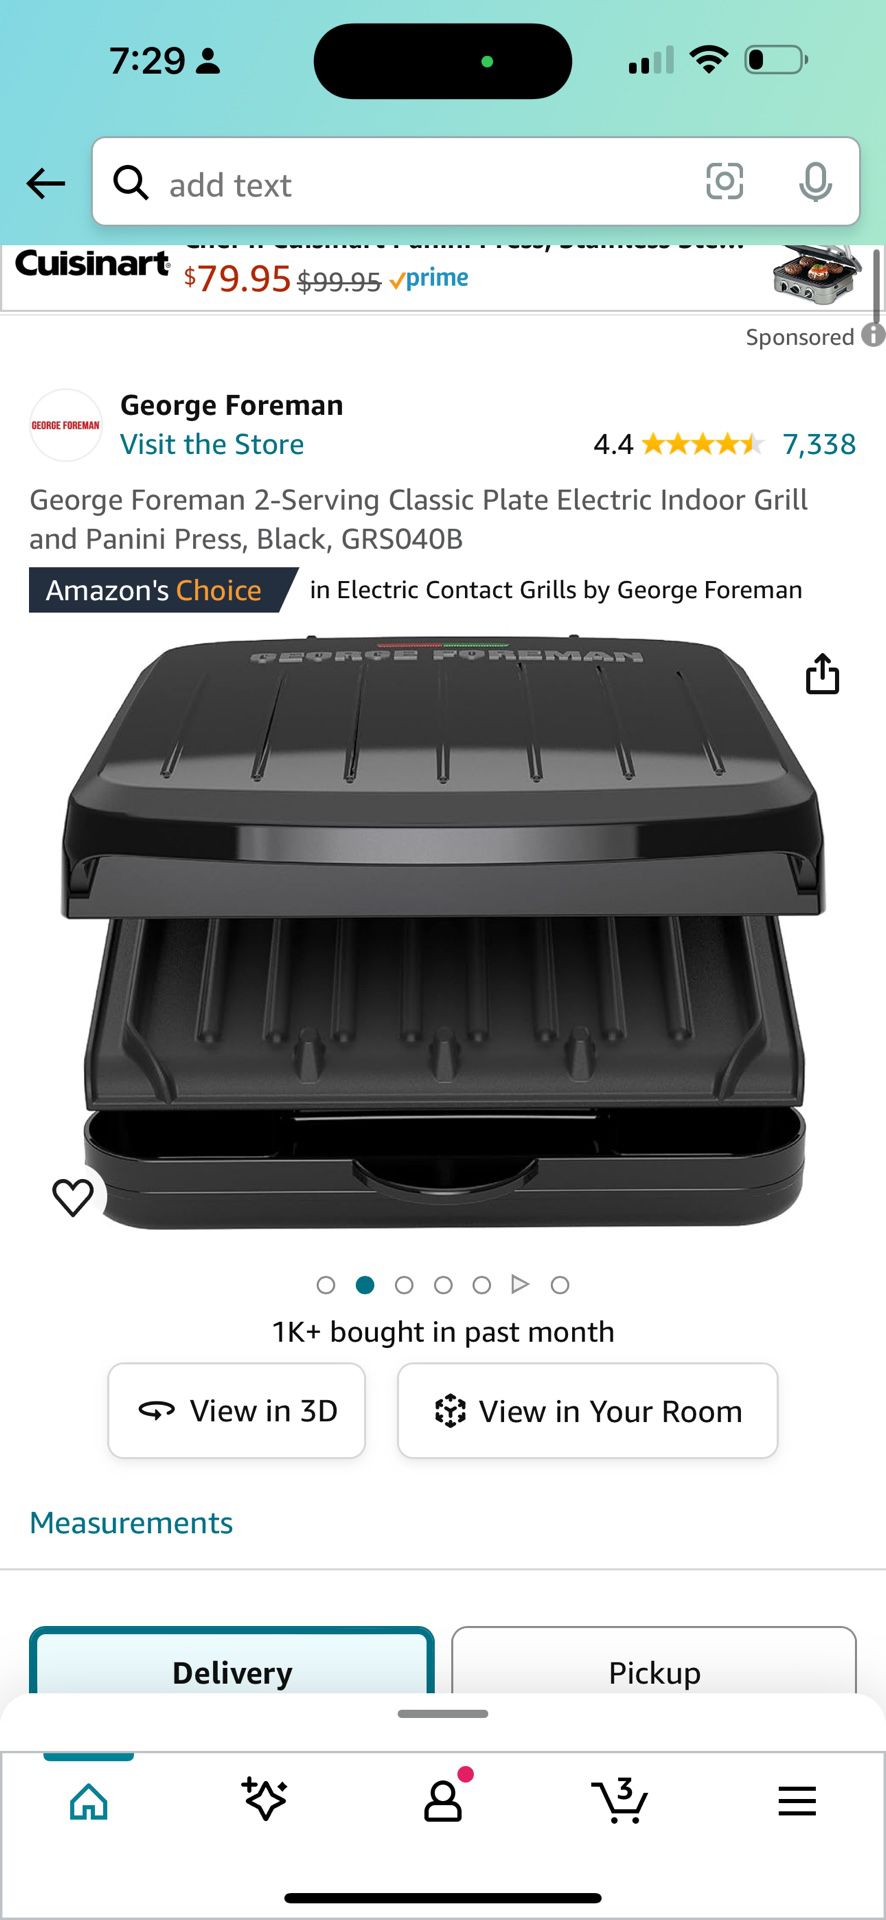 George Foreman 2-Serving Classic Plate Electric Indoor Grill and Panini Press, Black, GRS040B $15